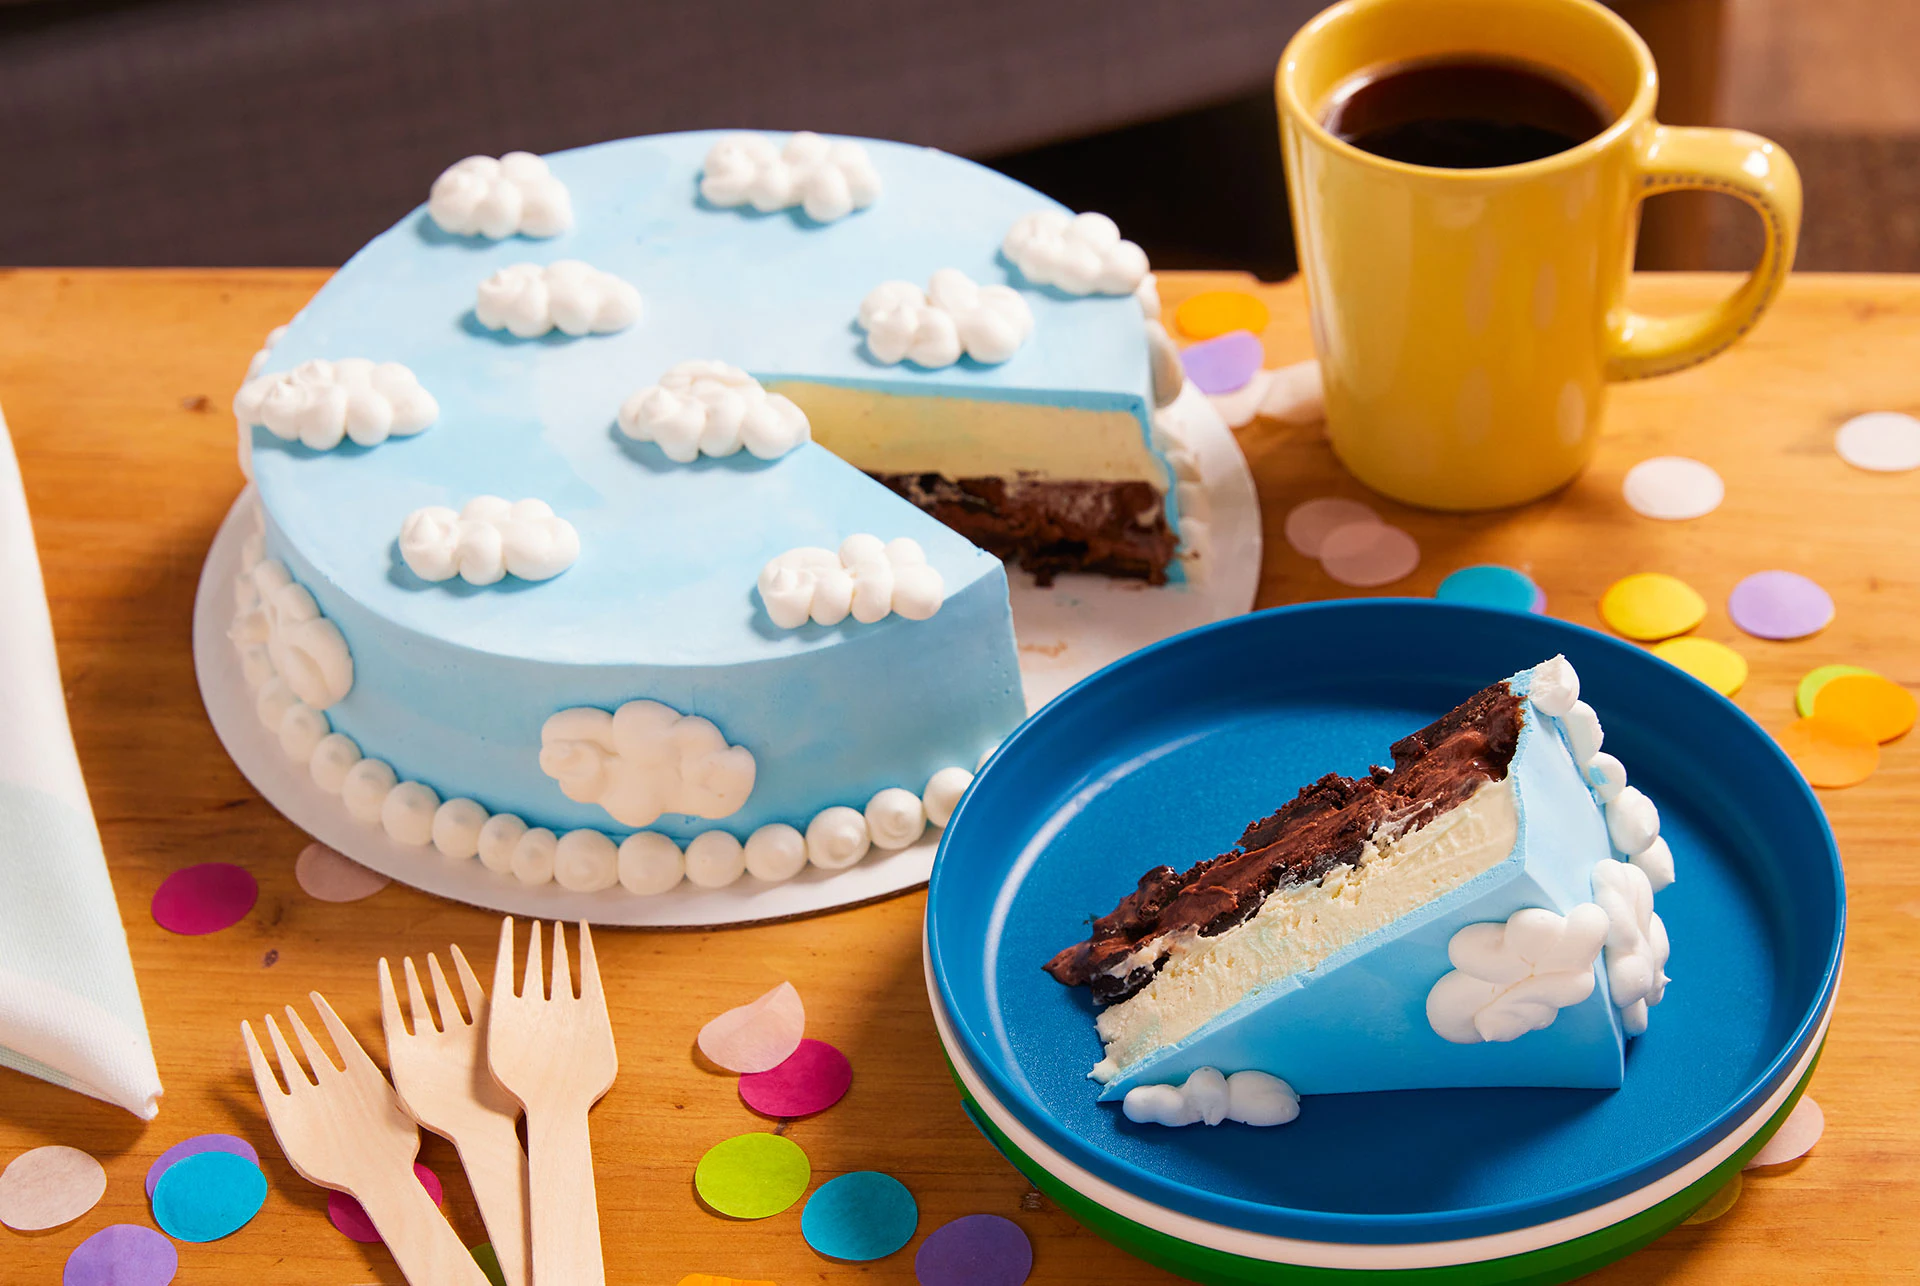 An ice cream cake with a slice from it on a plate next to a cup